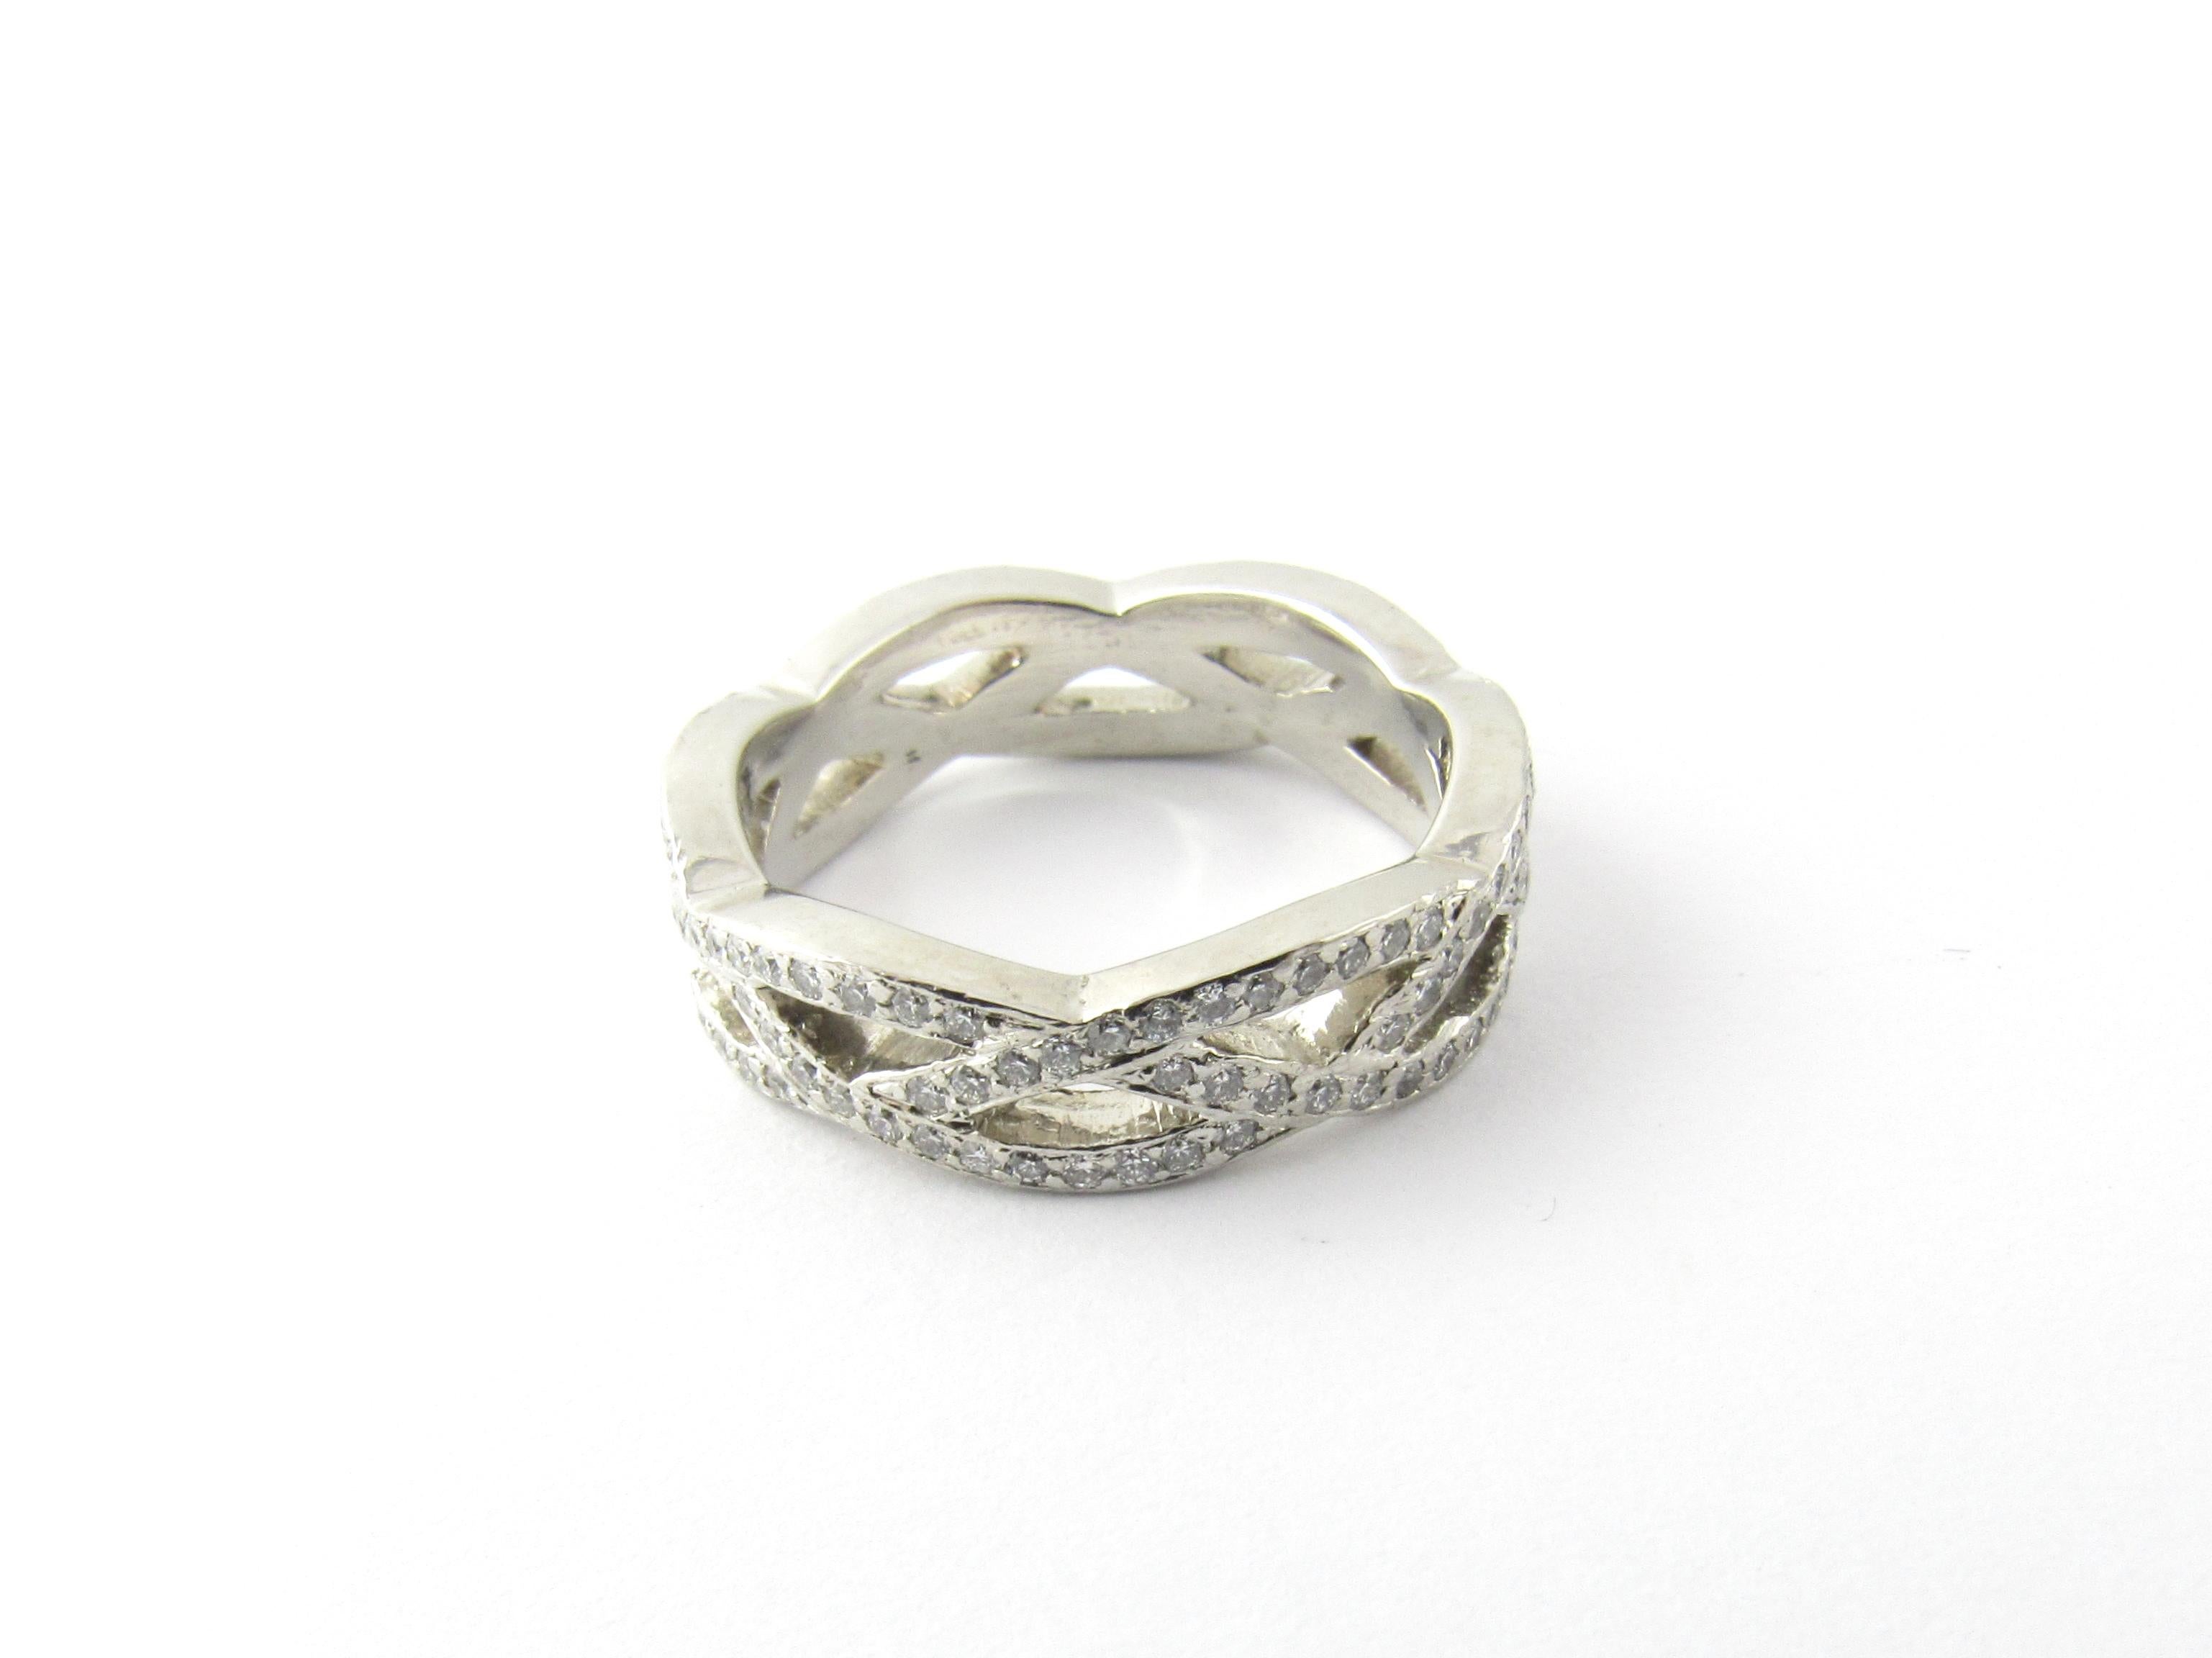 Platinum and Diamond Wedding Band Size 6.25-

This sparkling eternity band features 132 round brilliant cut diamonds* set in a stunning braided design.  Width measures 5 mm.

*Chips noted to some not visible to naked eye

Approximate total diamond